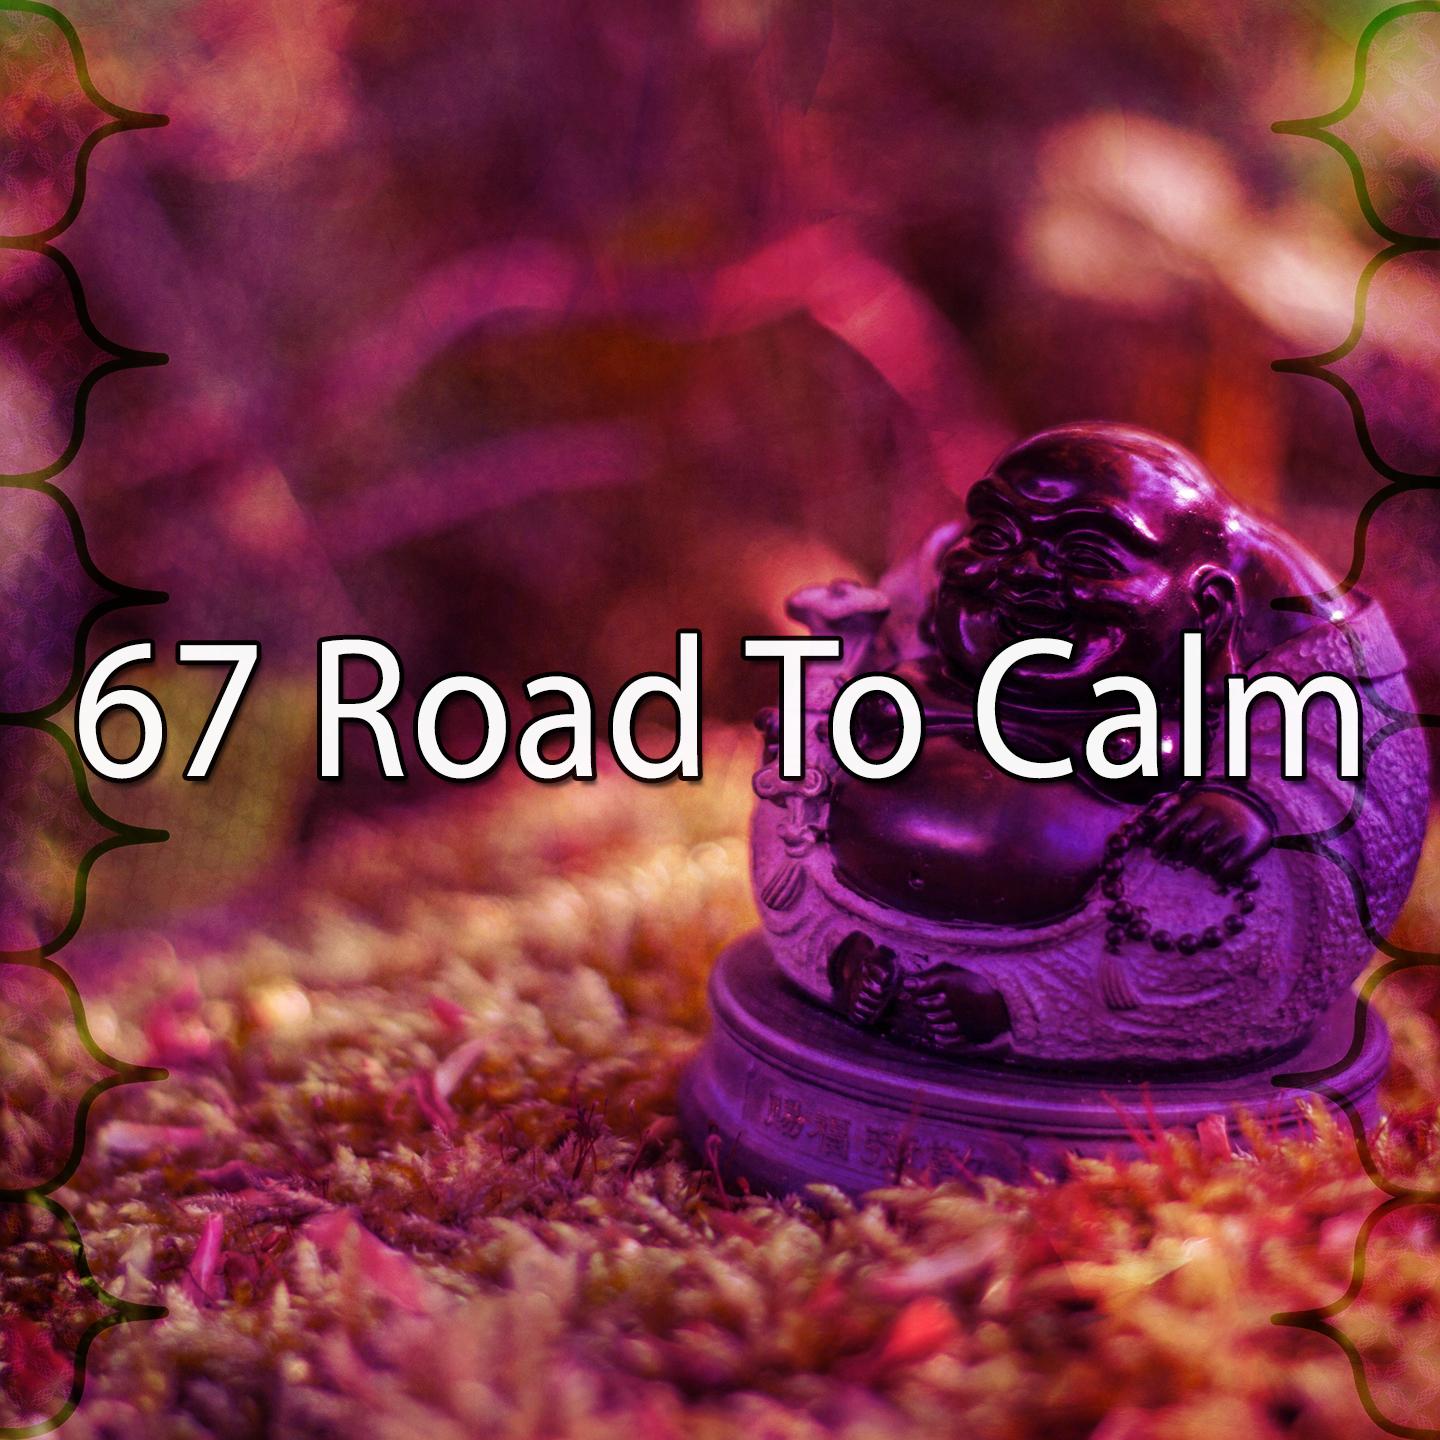 67 Road to Calm